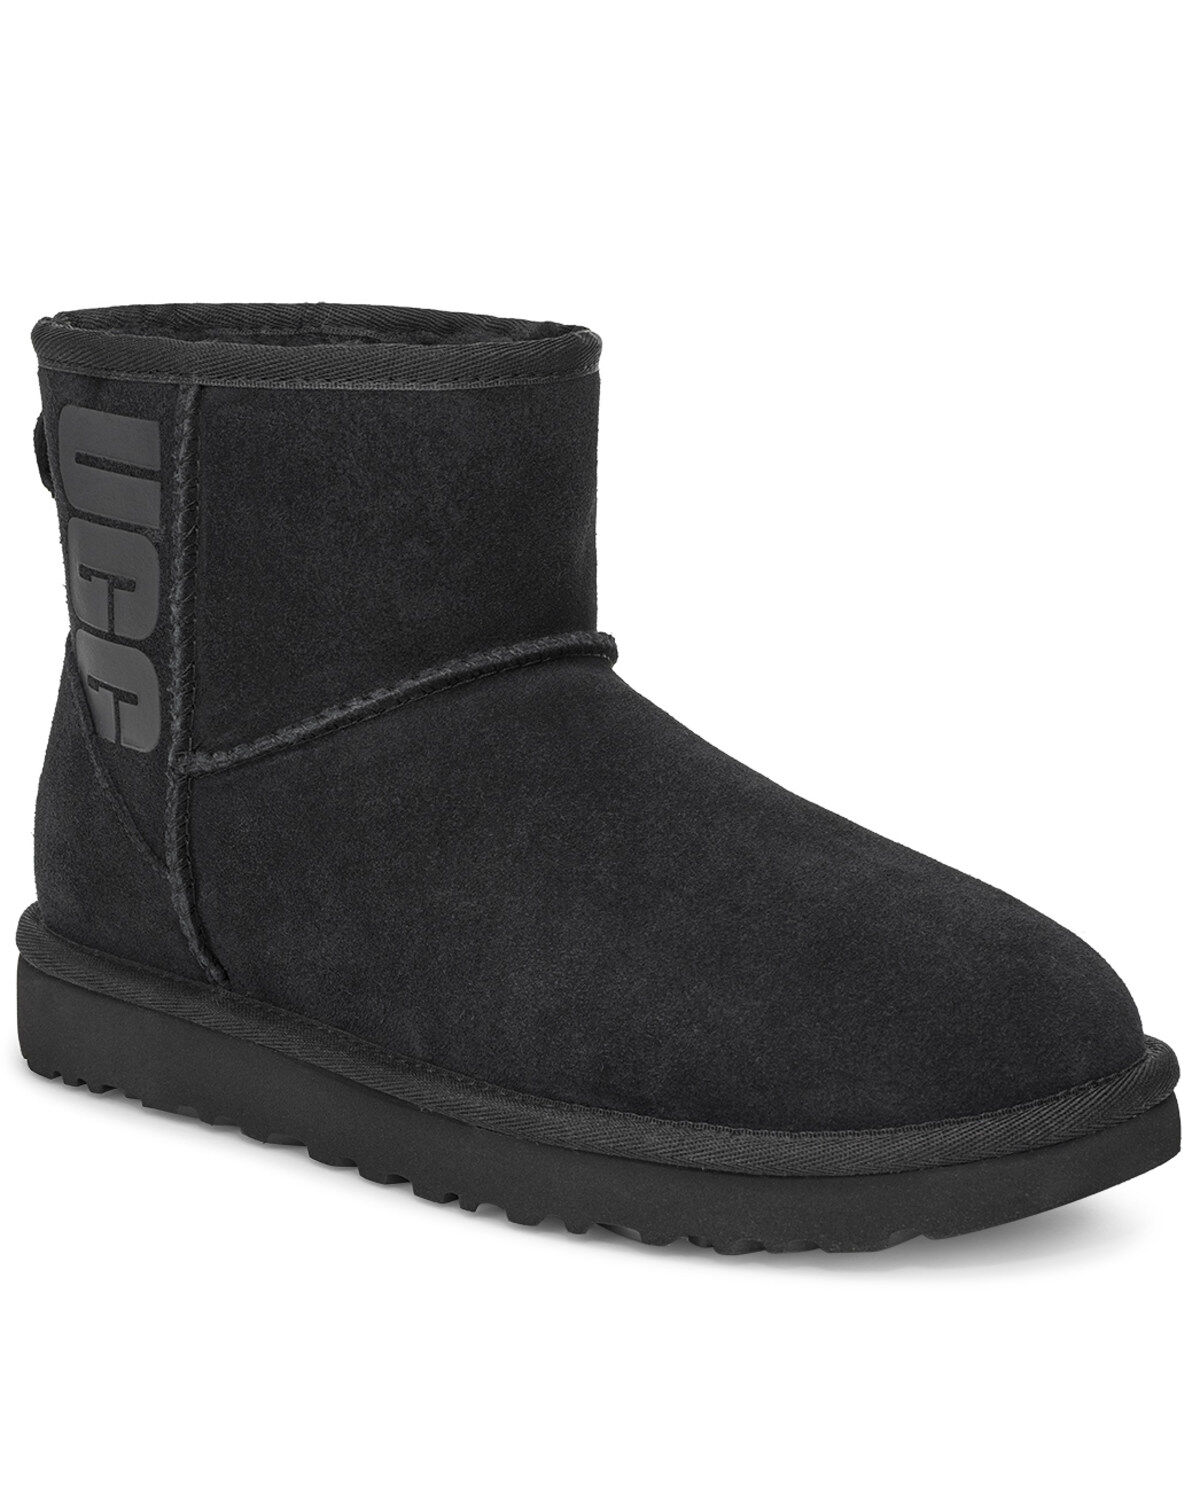 grey leather ugg boots